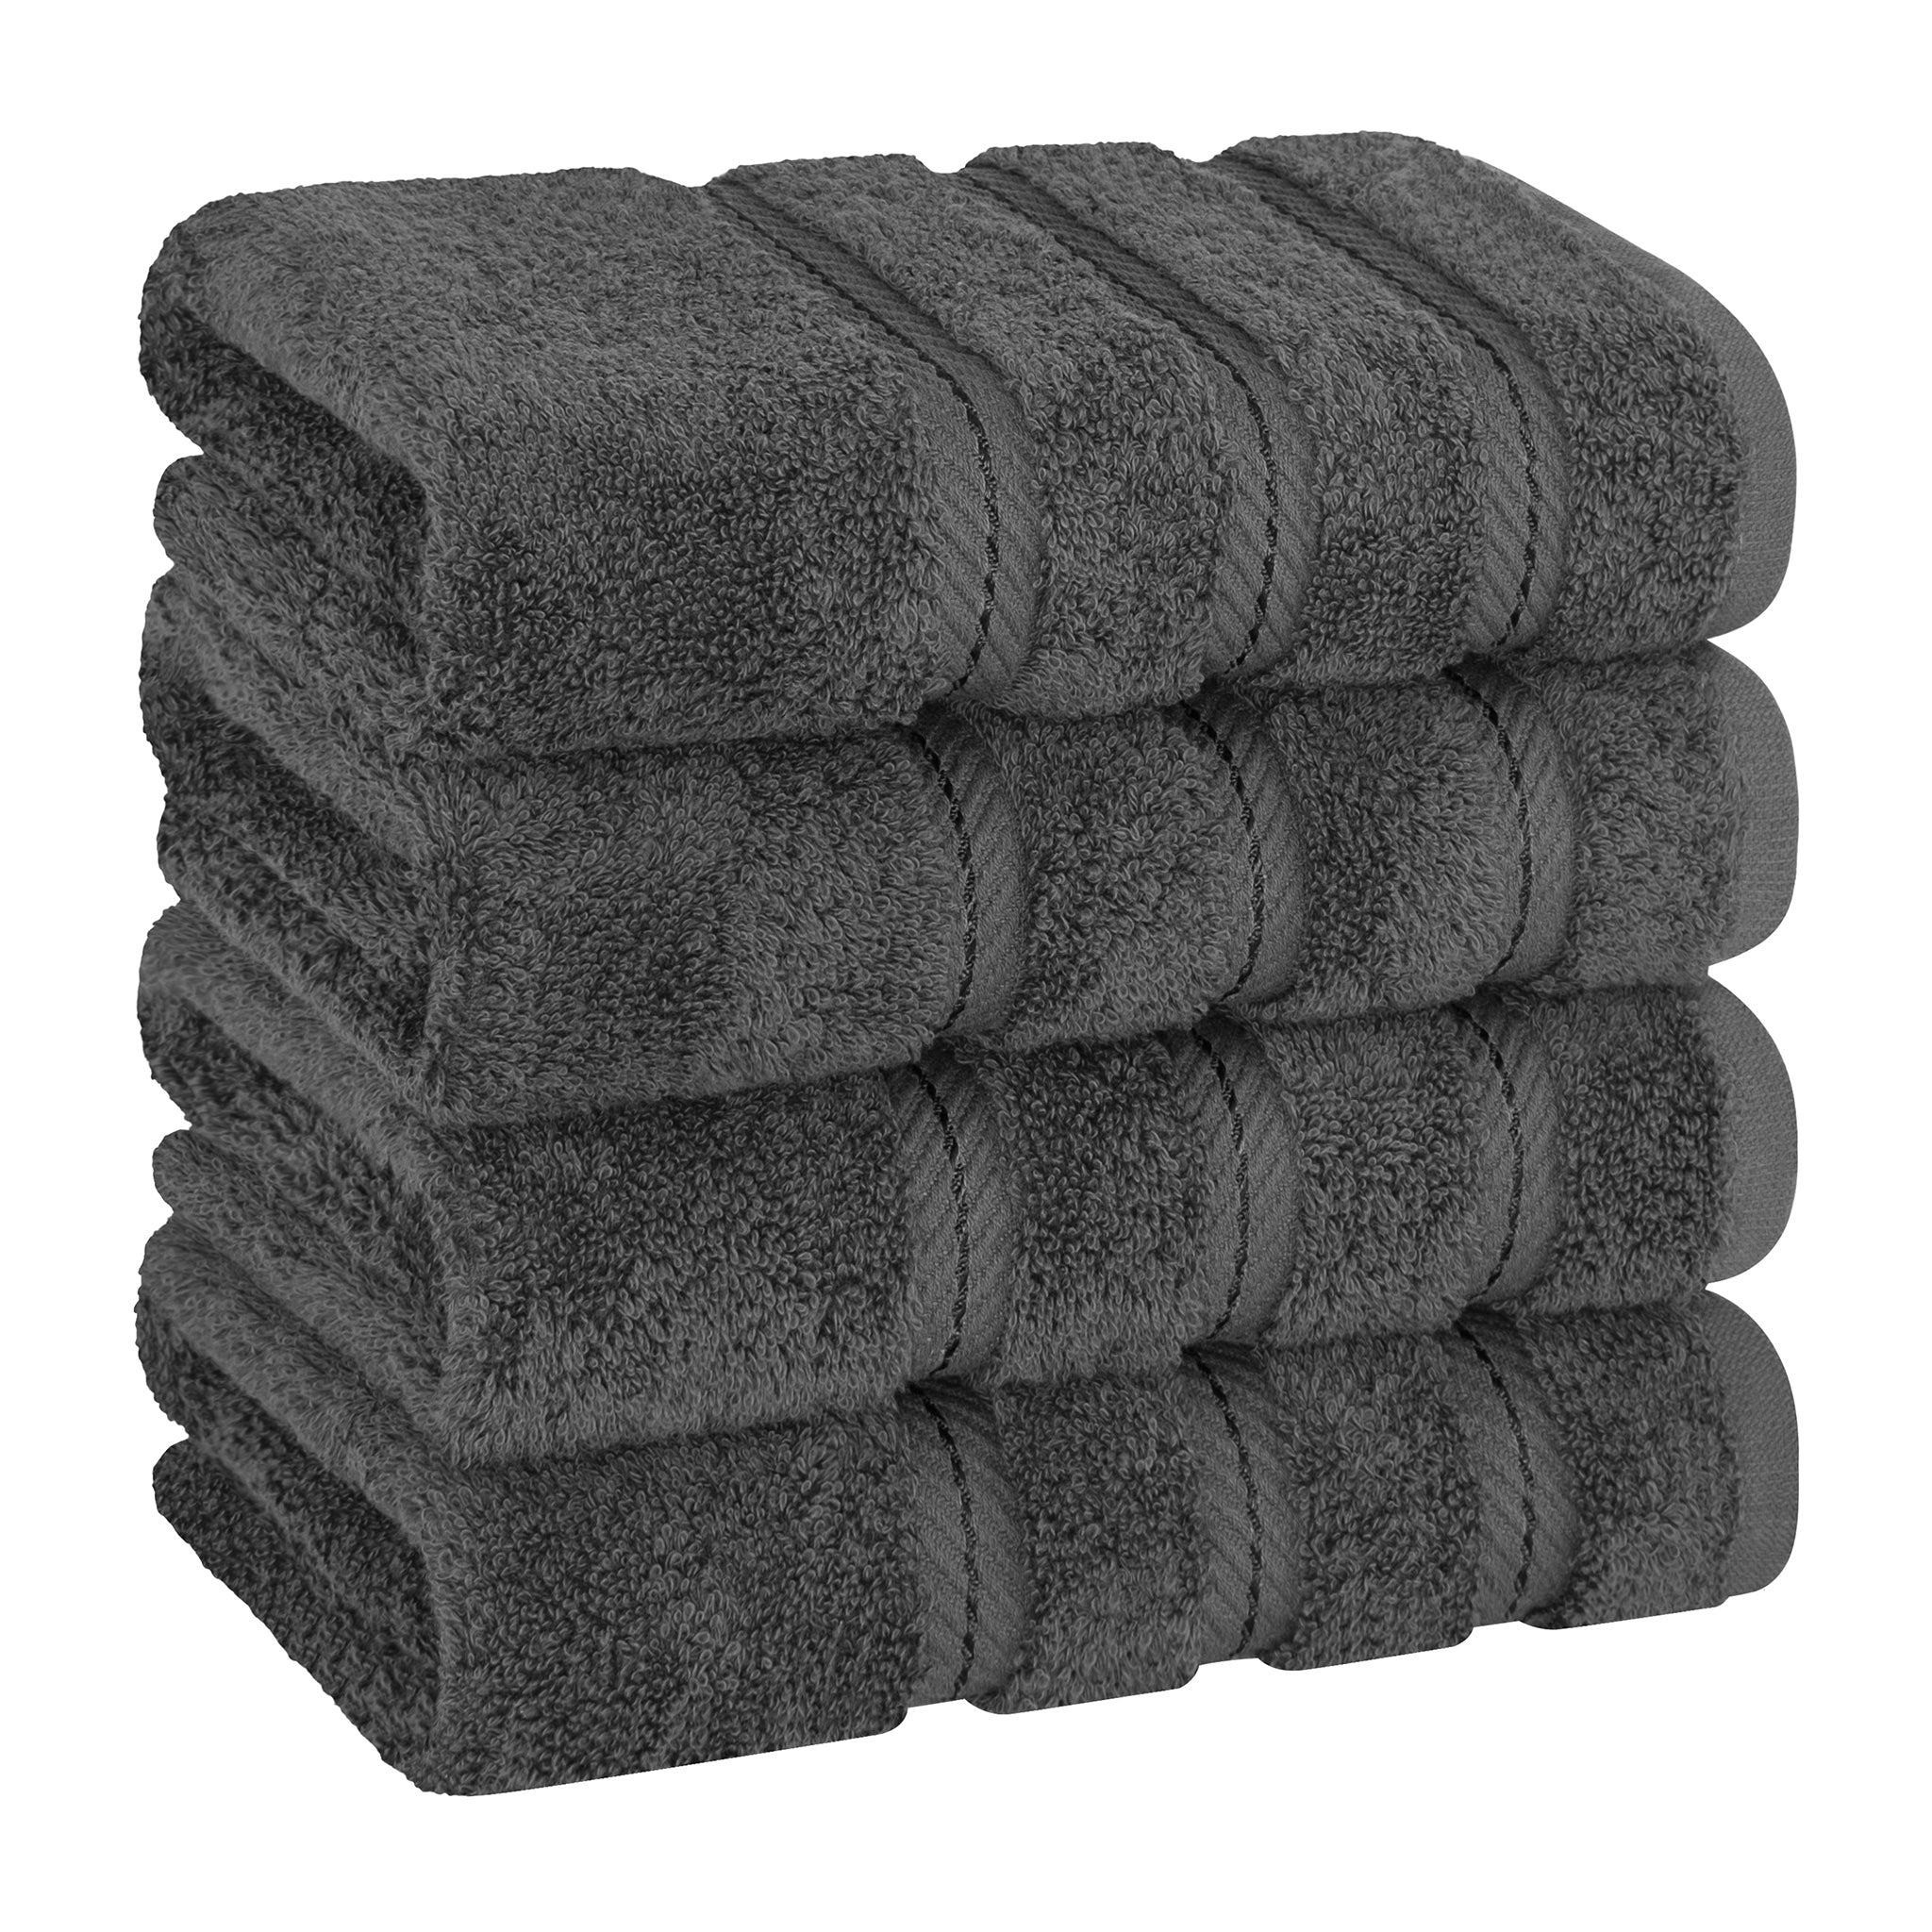 Aston and Arden White Turkish Luxury Striped Hand Towels for Bathroom 600 gsm, 18x32 in., 4-Pack , Super Soft Absorbent Hand Towels - Slate